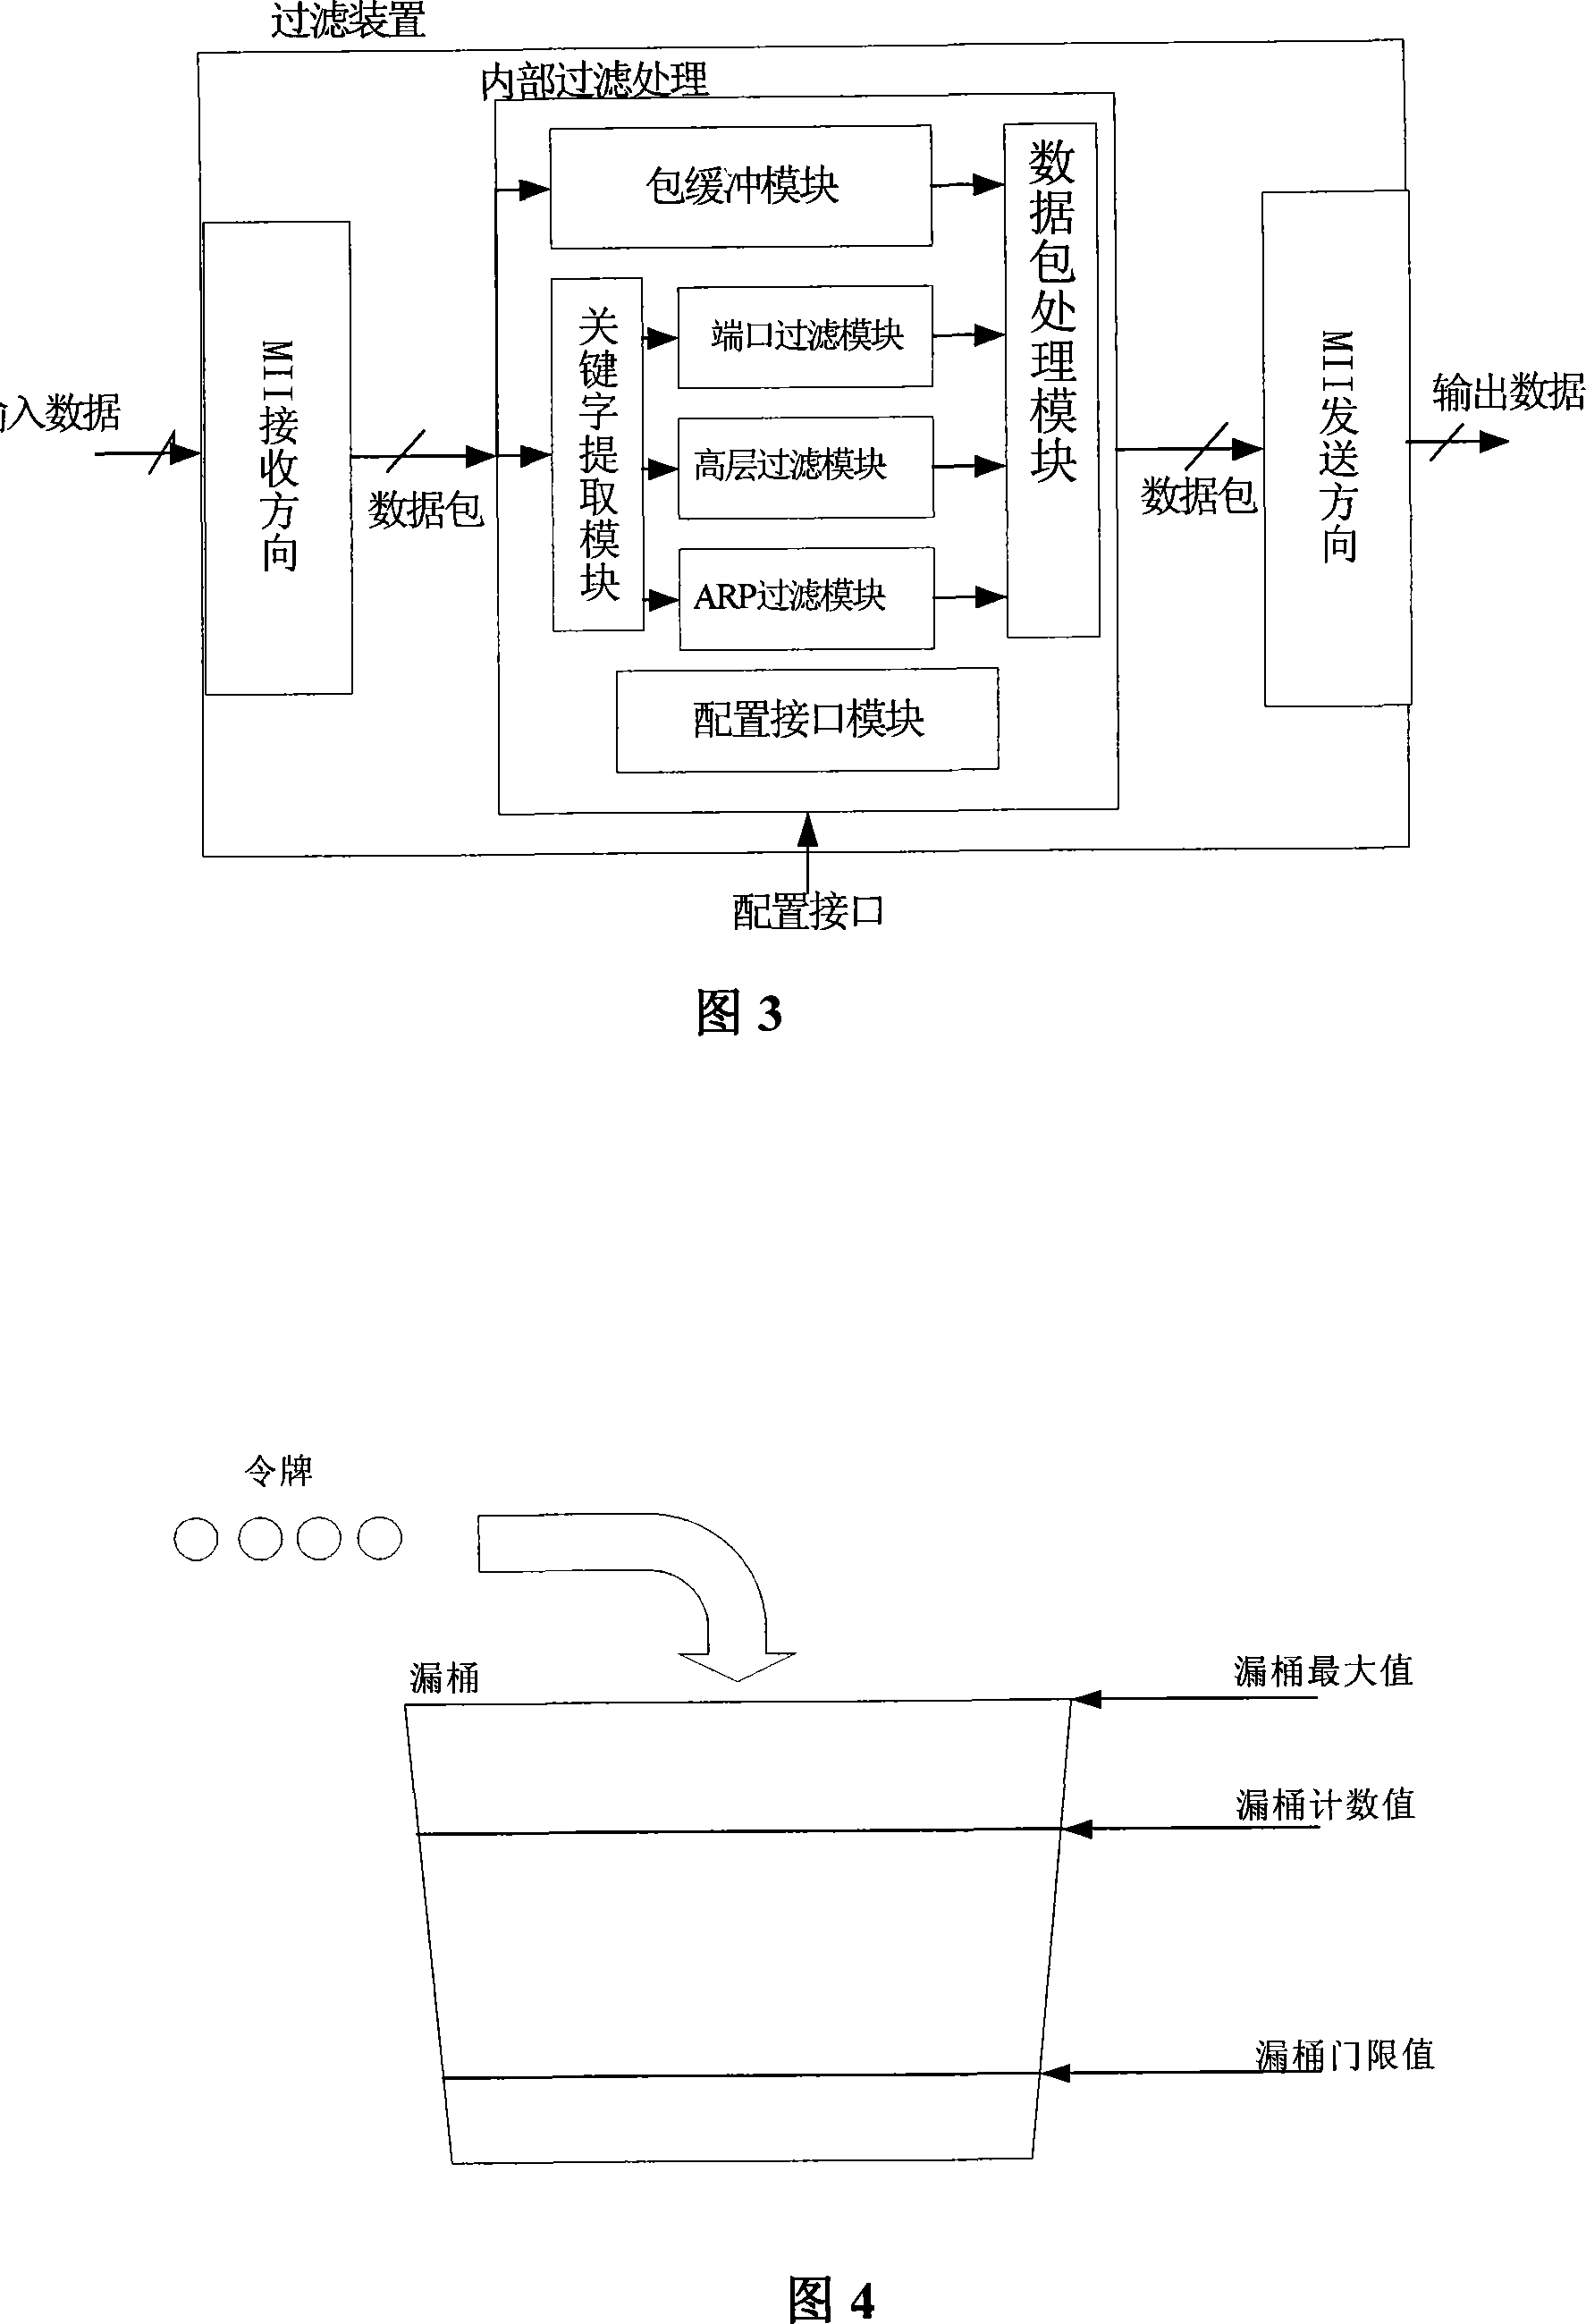 Novel self-defining ethernet out-of-band data packet filtering method and device